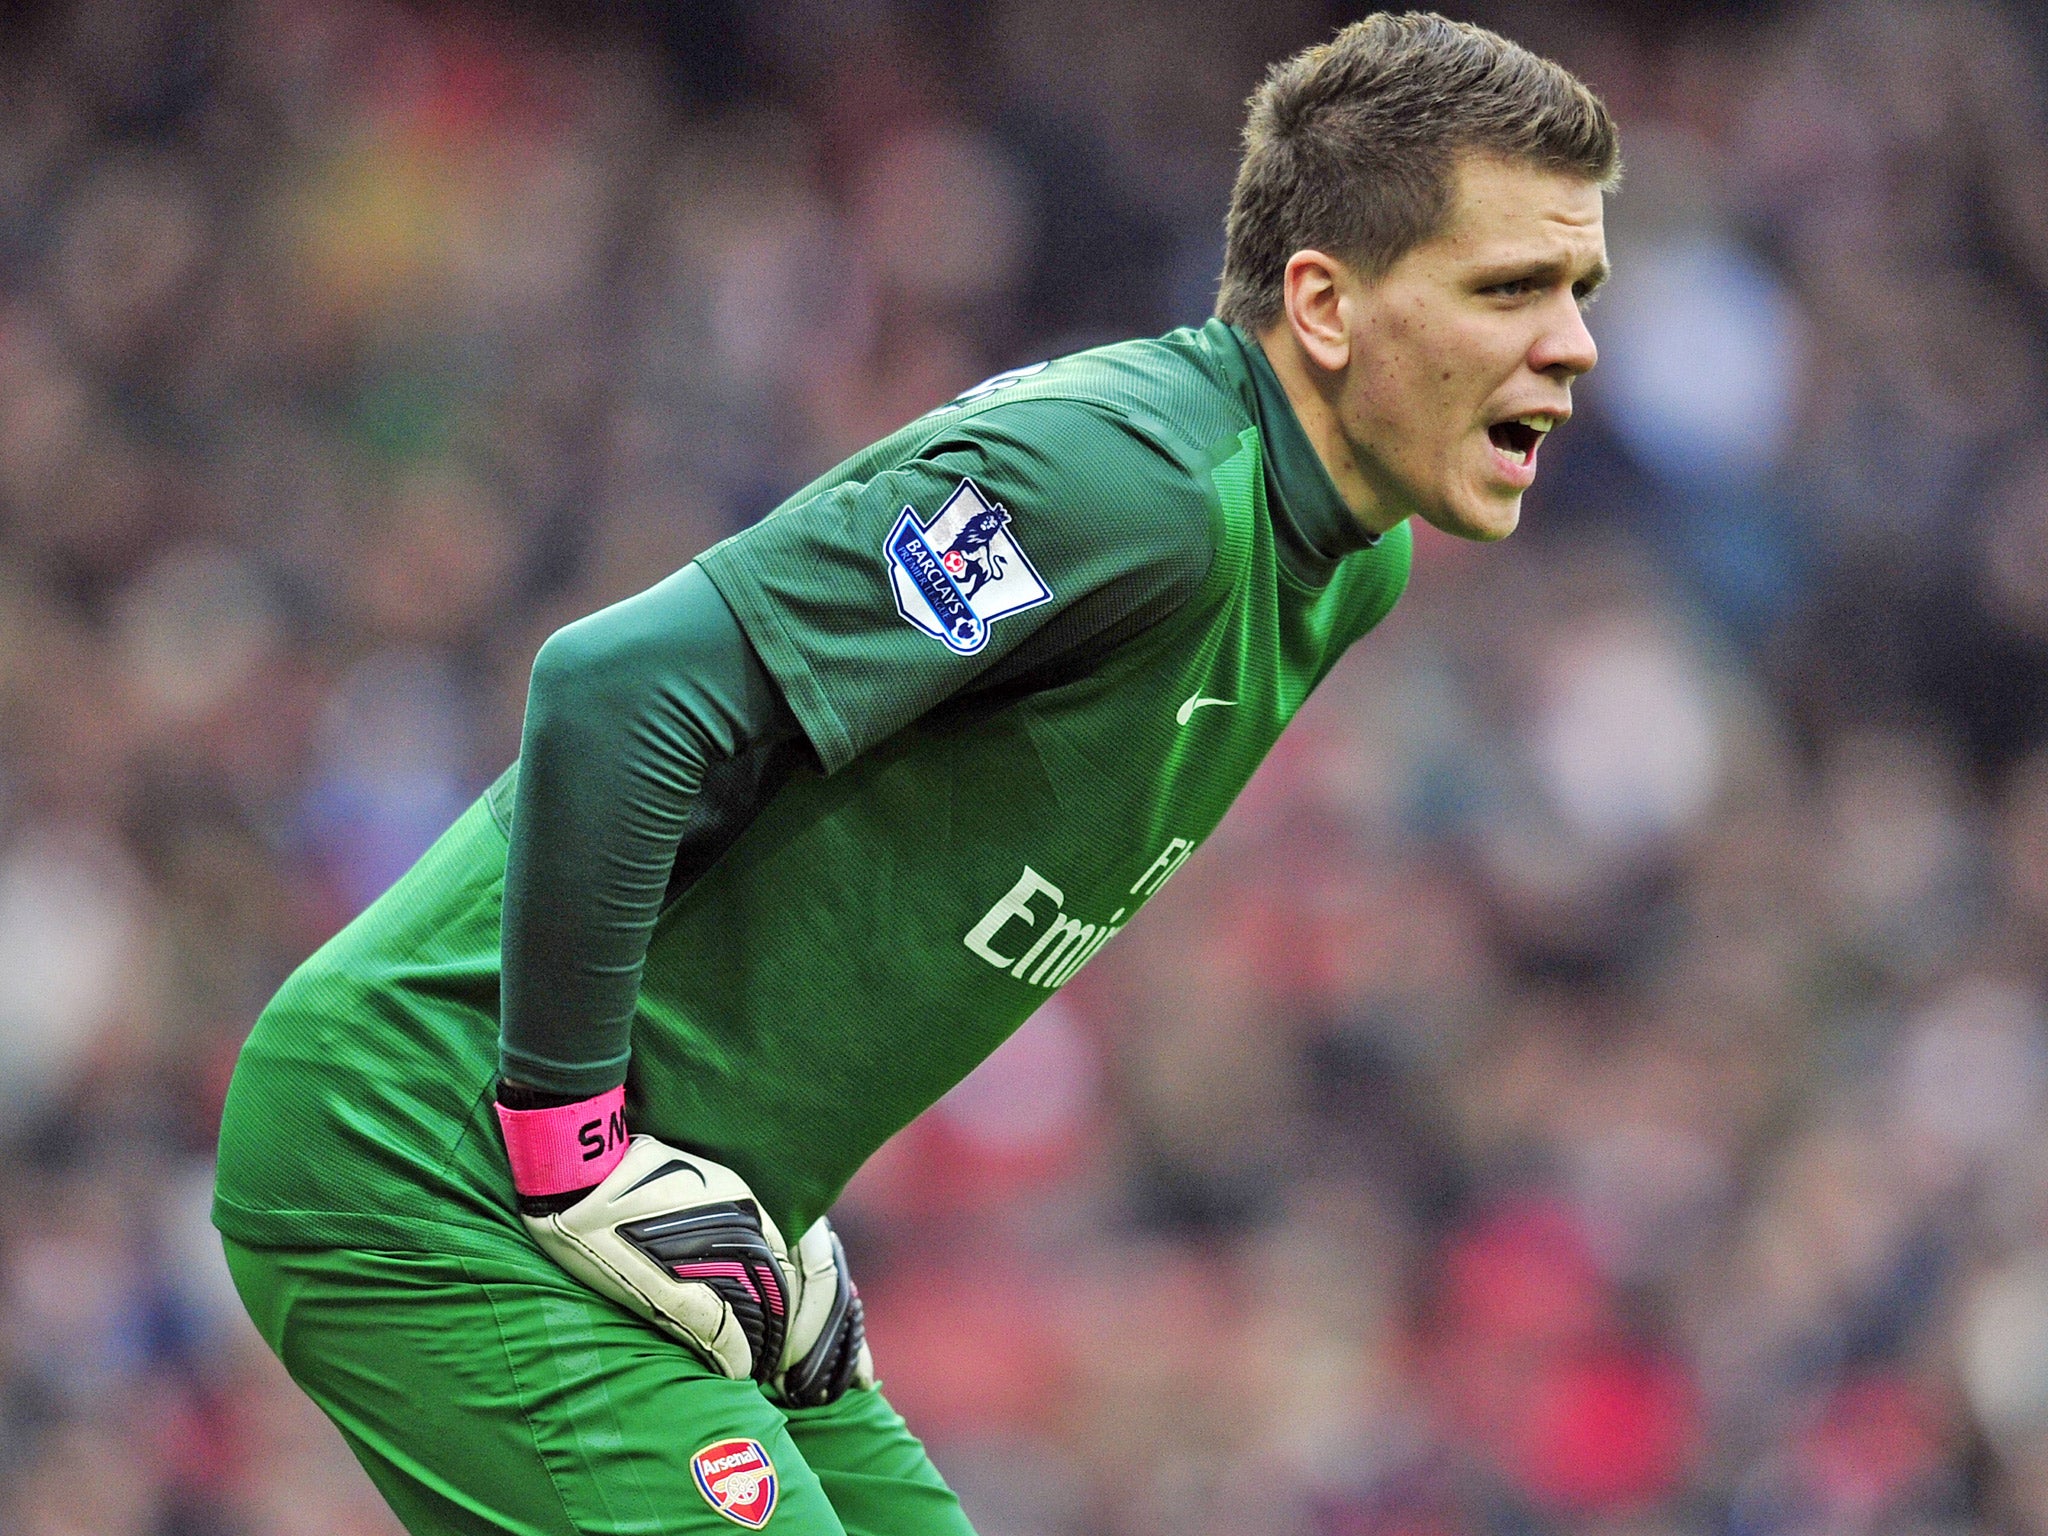 Wojciech Szczesny has been rested after ‘playing so many games’